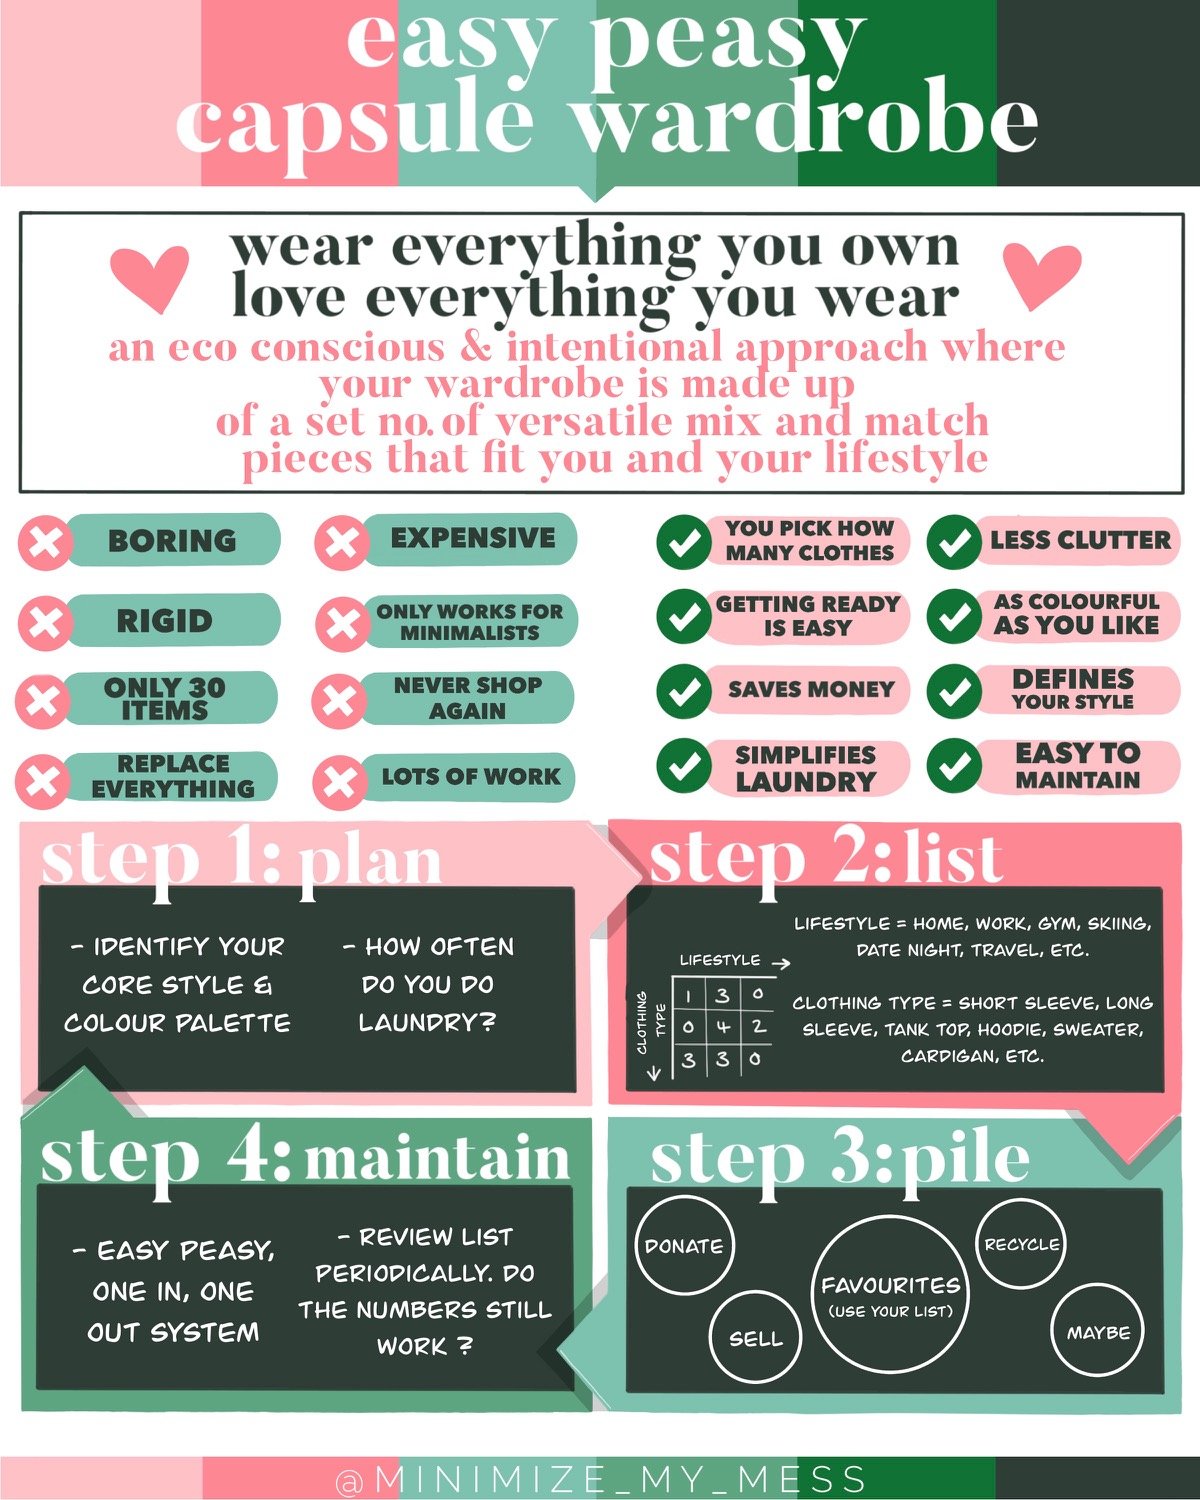 How to Dress Nice & Look Stylish - Your 5 Step Checklist